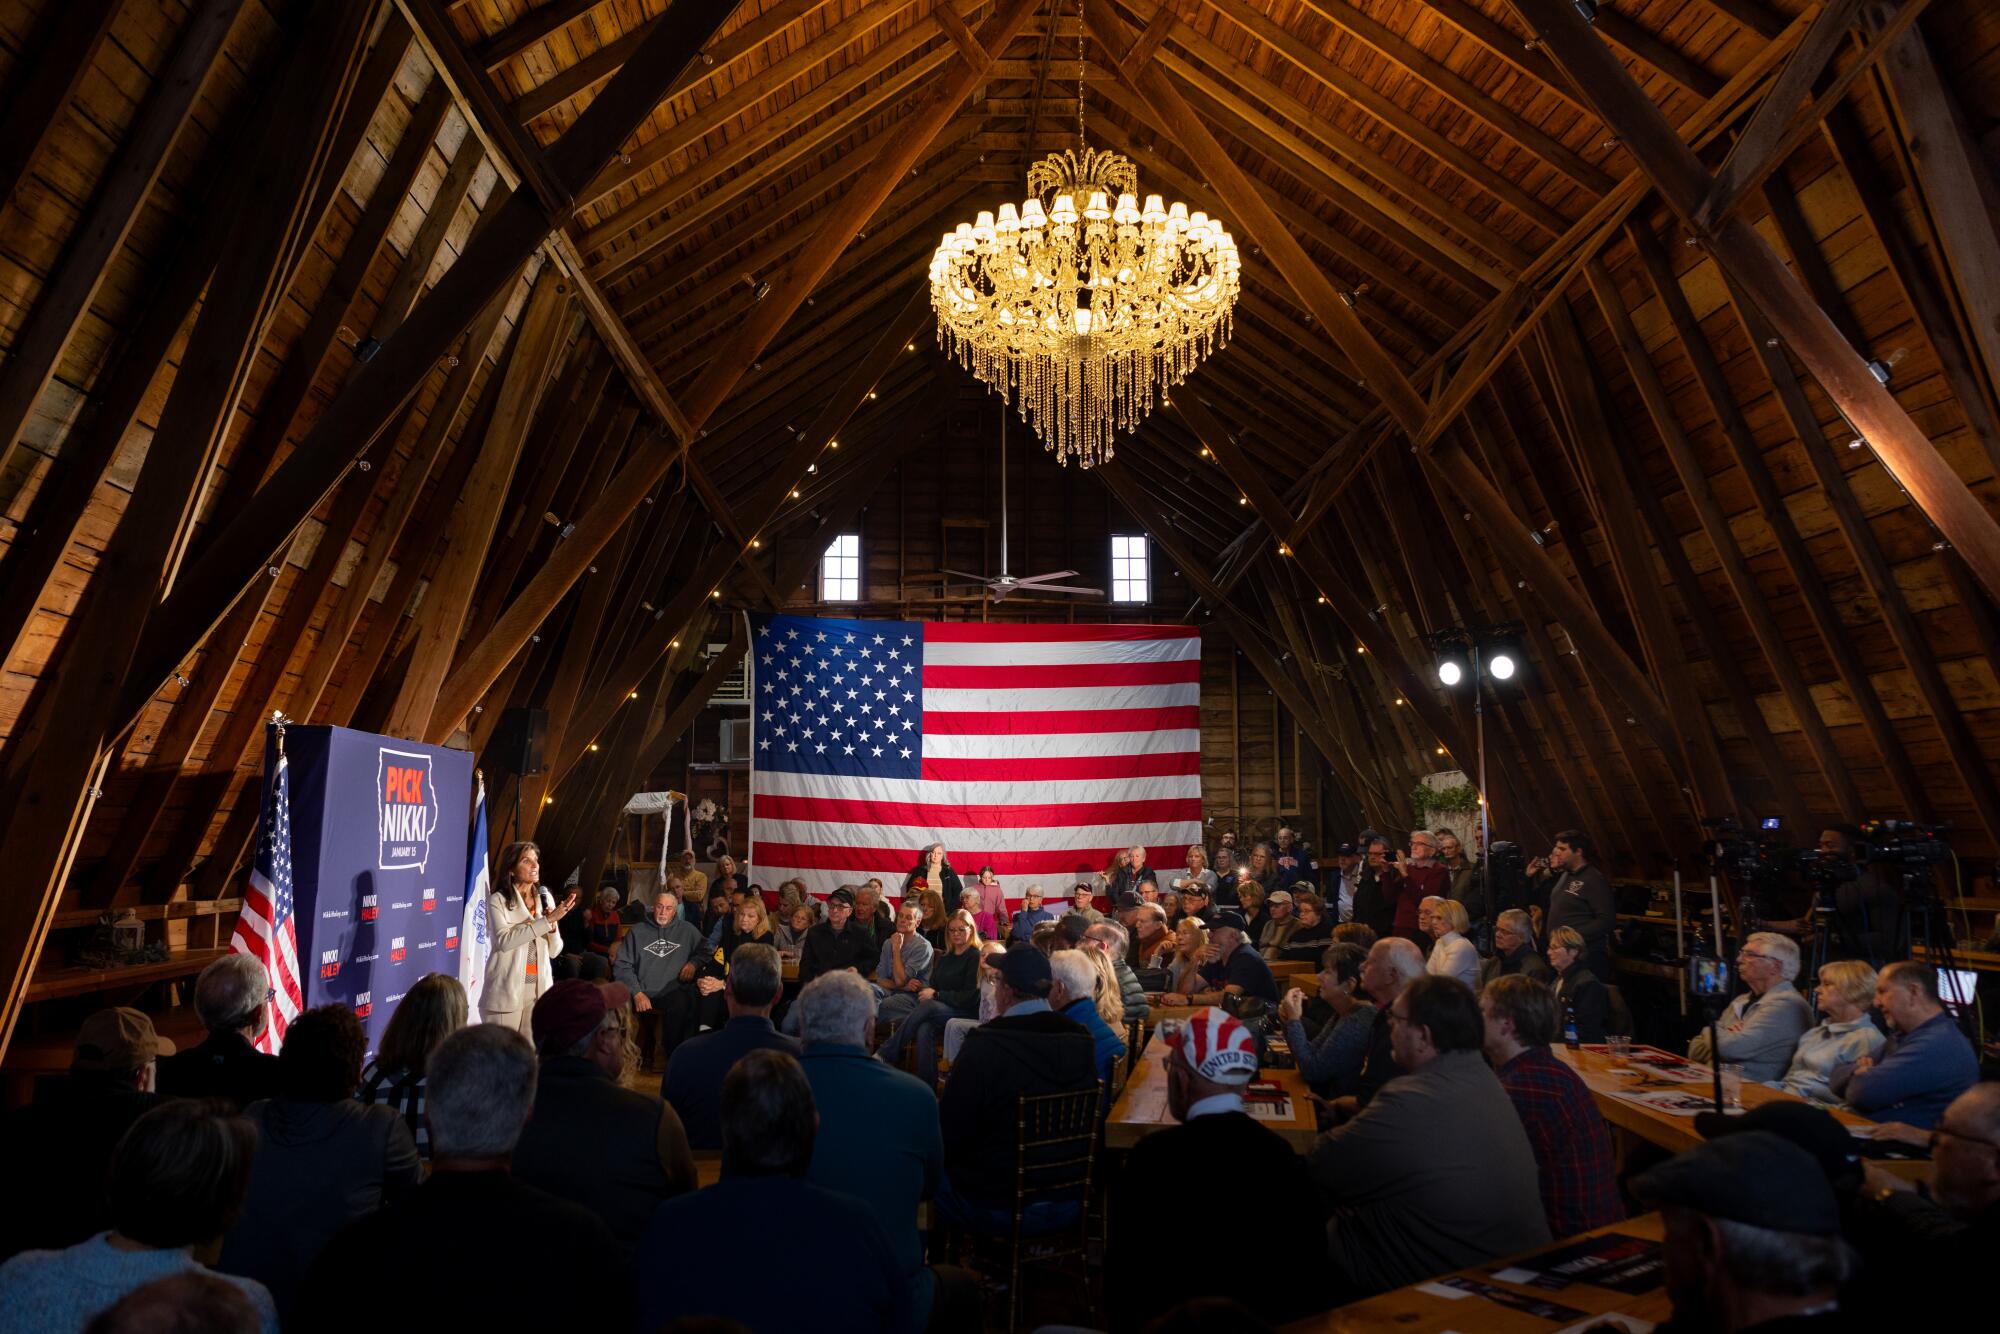 Nikki Haley campaigns in a converted barn